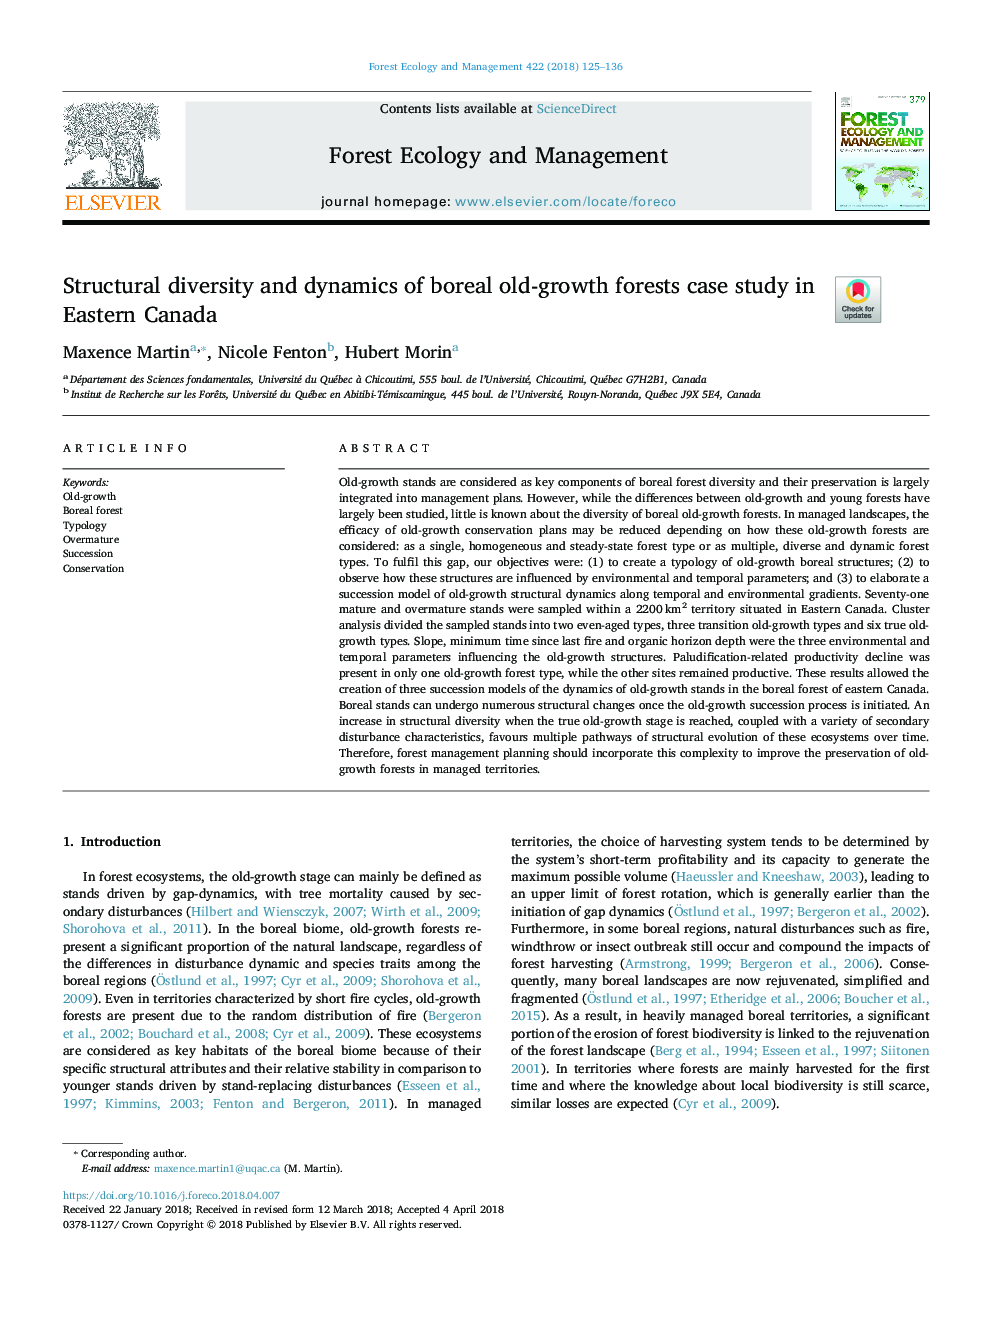 Structural diversity and dynamics of boreal old-growth forests case study in Eastern Canada